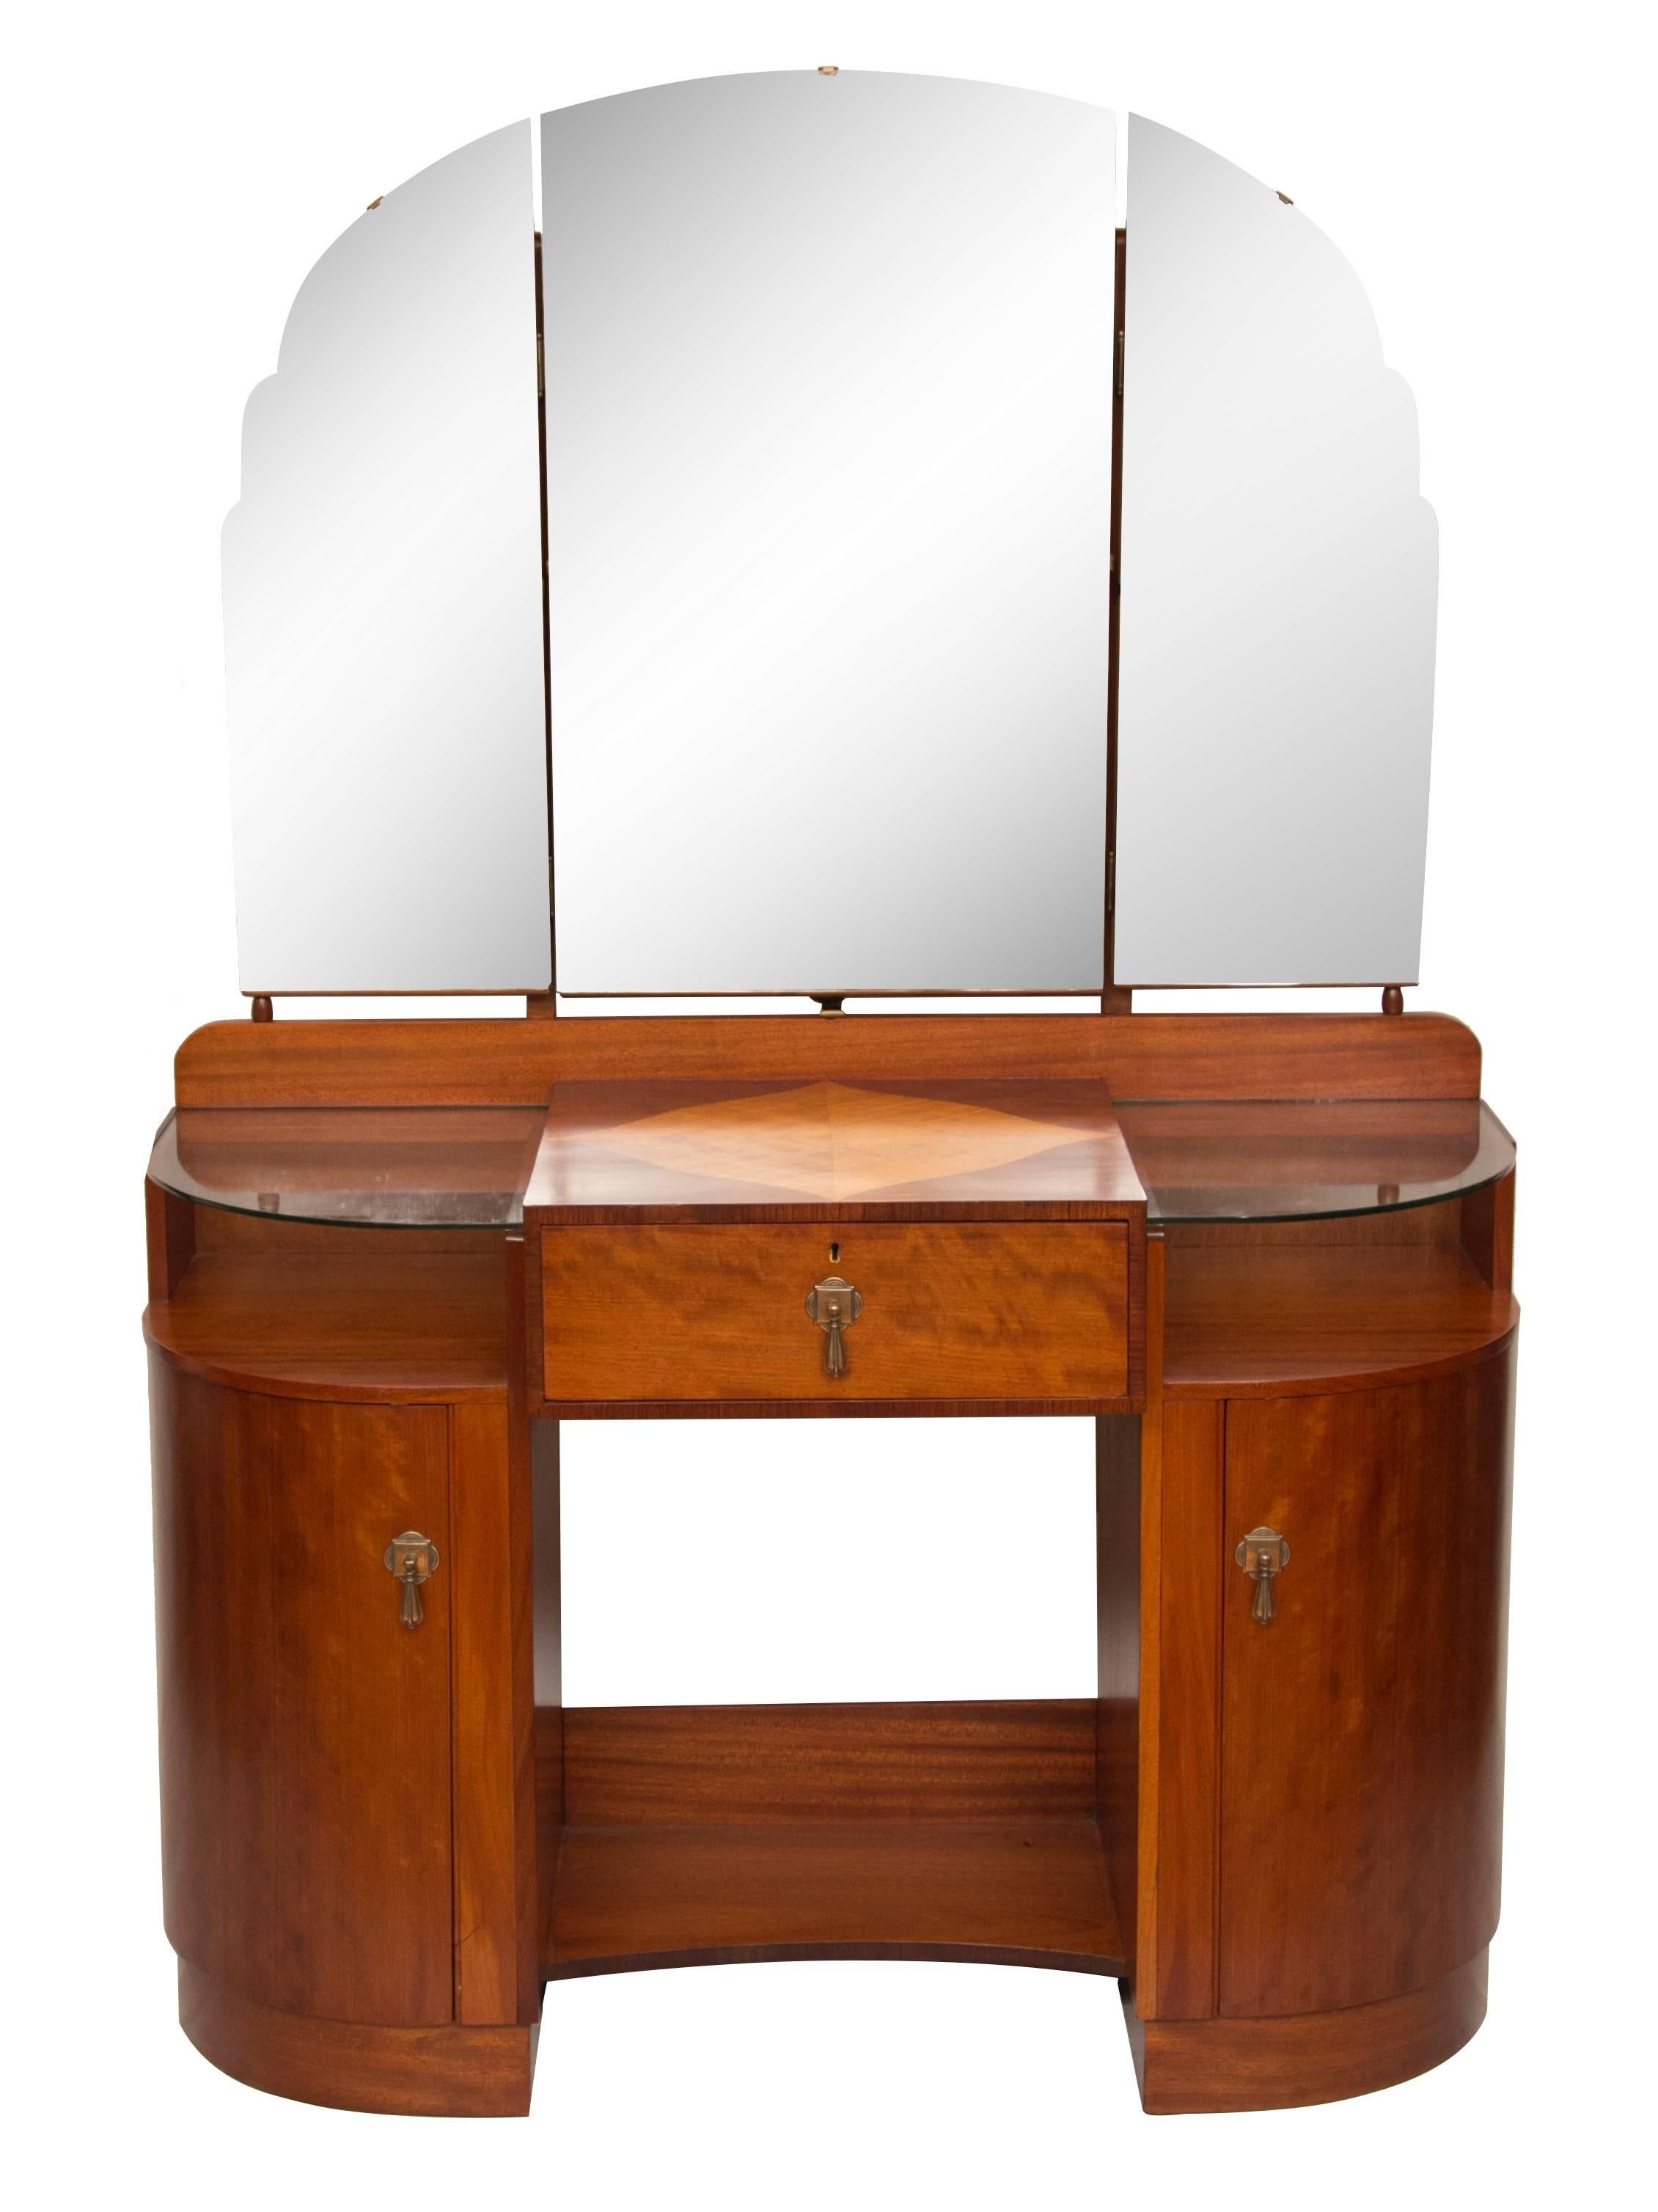 Art Deco dressing table.
Art Deco dressing table by Maple & Co., very fine quality in beautiful satin walnut with satin maple detail, bronze handles.
British, circa 1930
Measures: 77.5 cm H at the front, 114 cm W 49 cm D 161 cm H to the top of